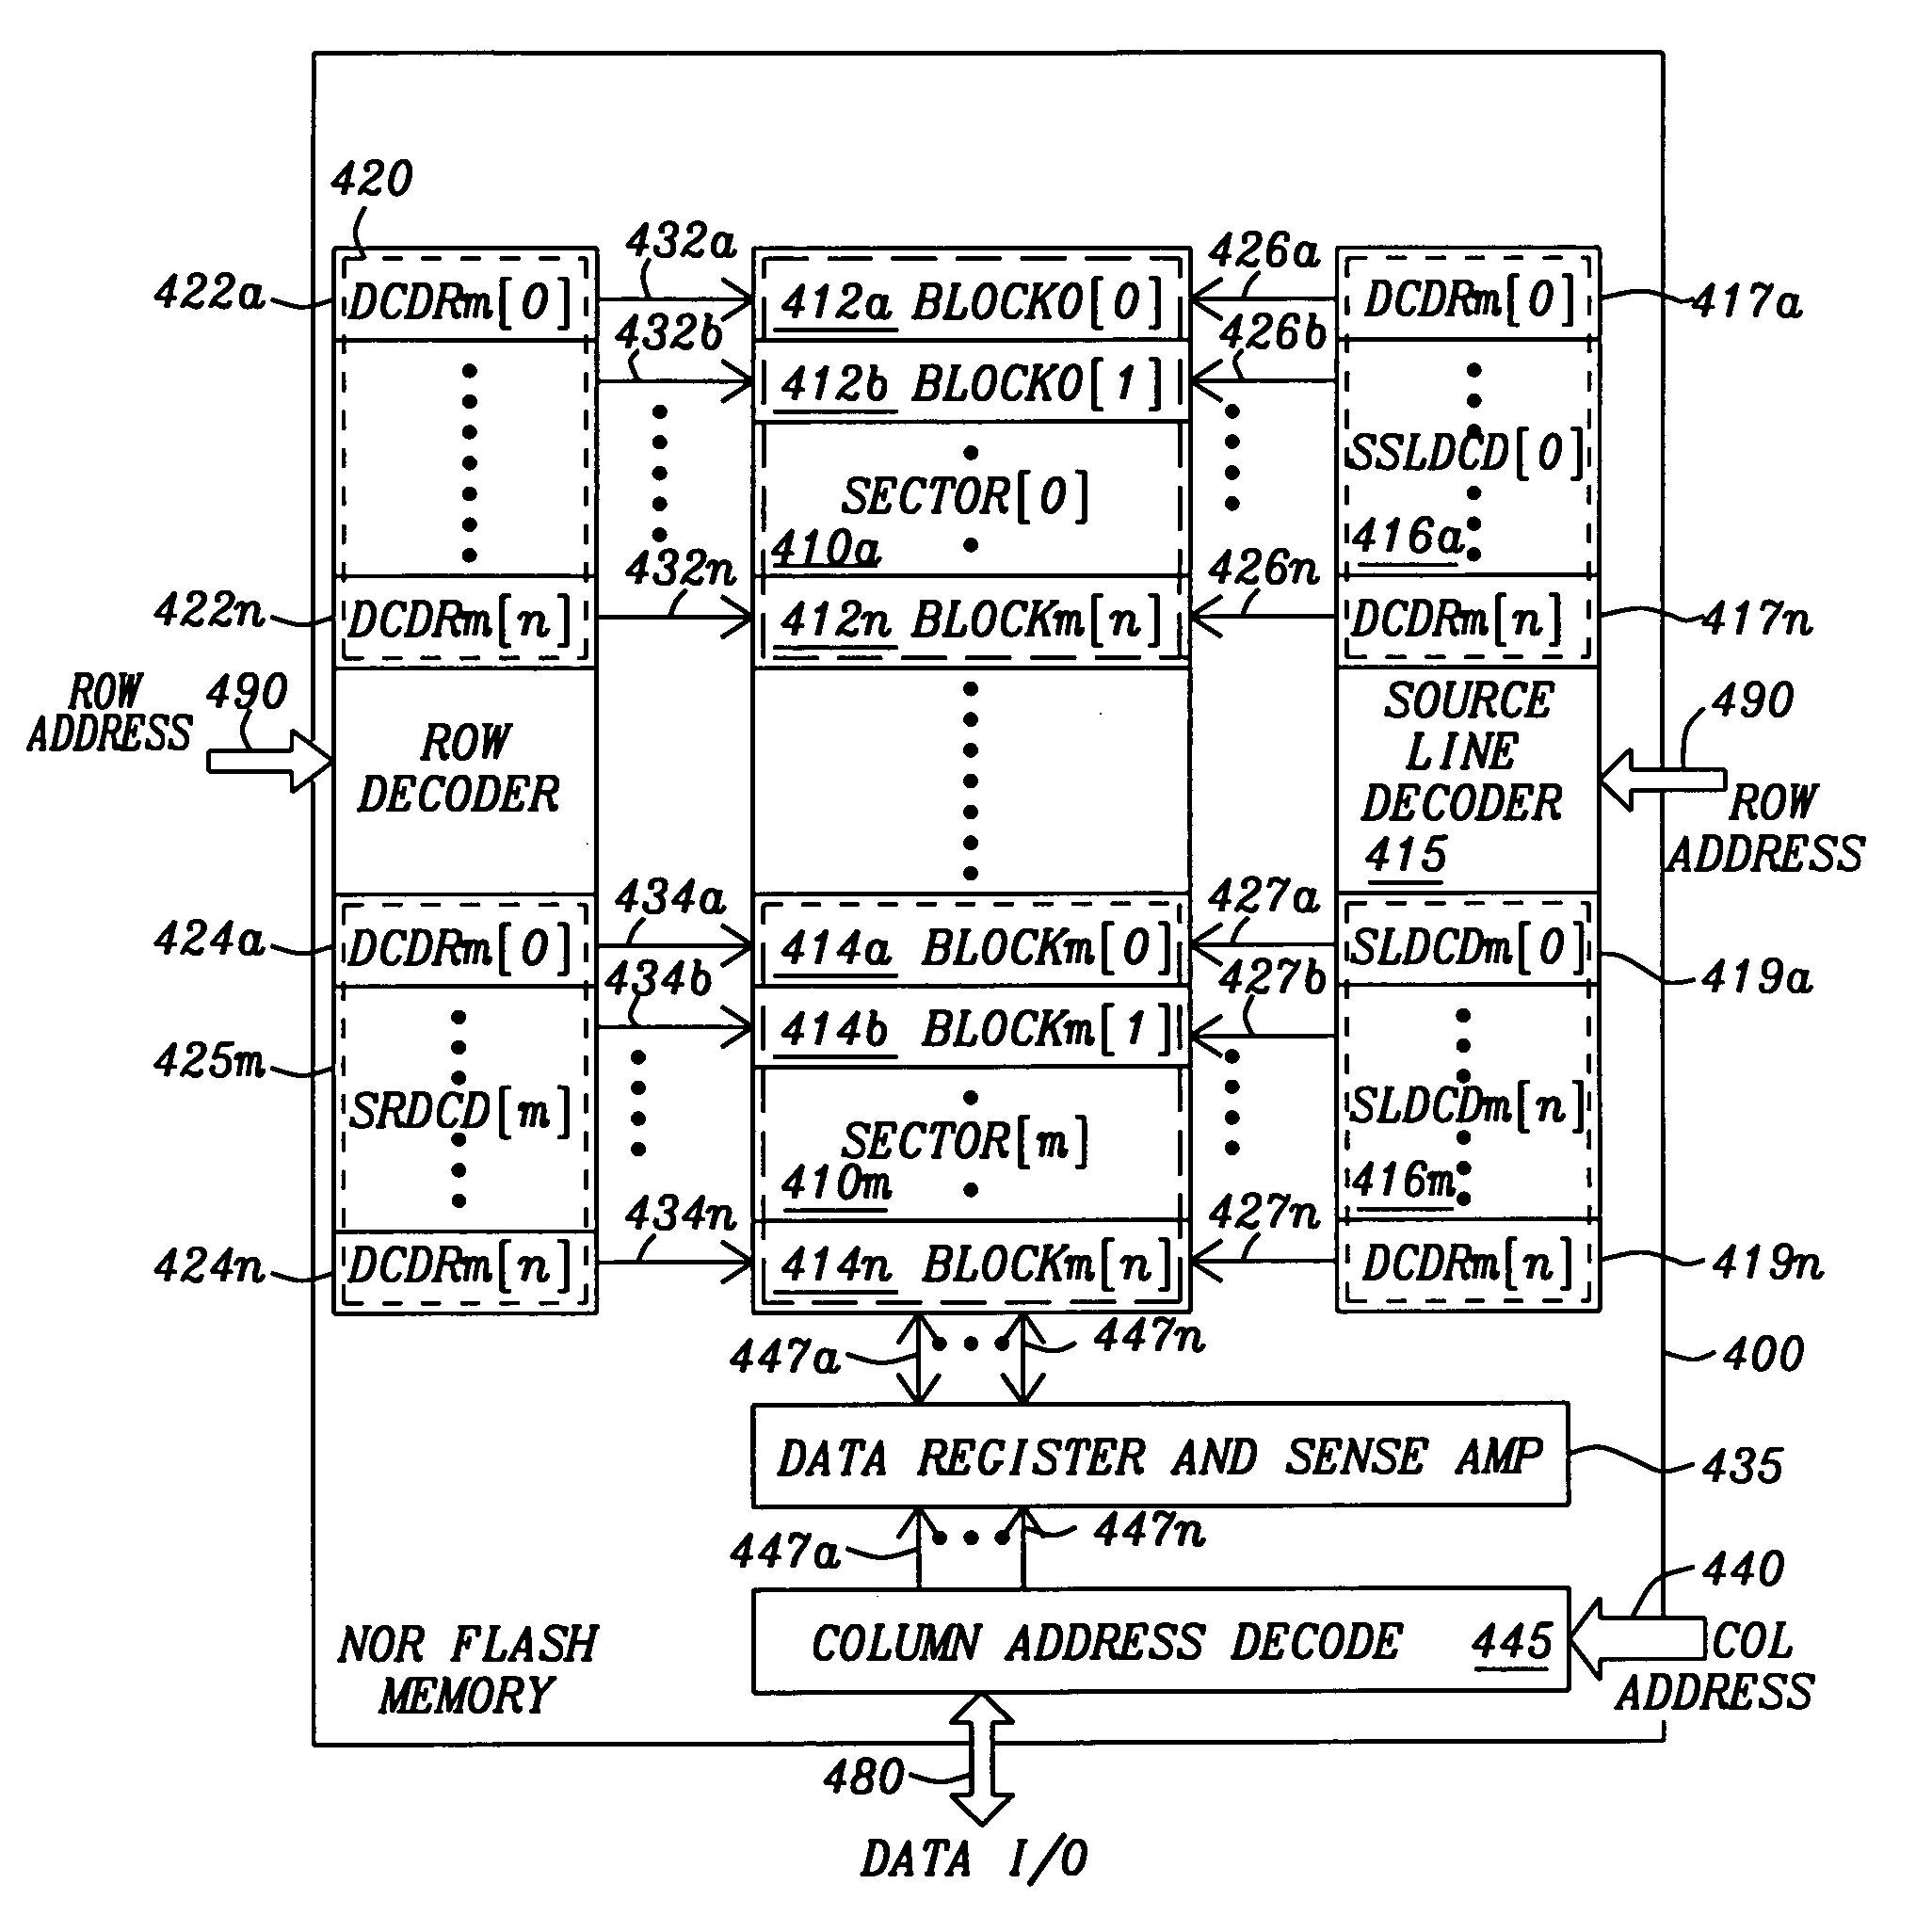 Apparatus and method for inhibiting excess leakage current in unselected nonvolatile memory cells in an array